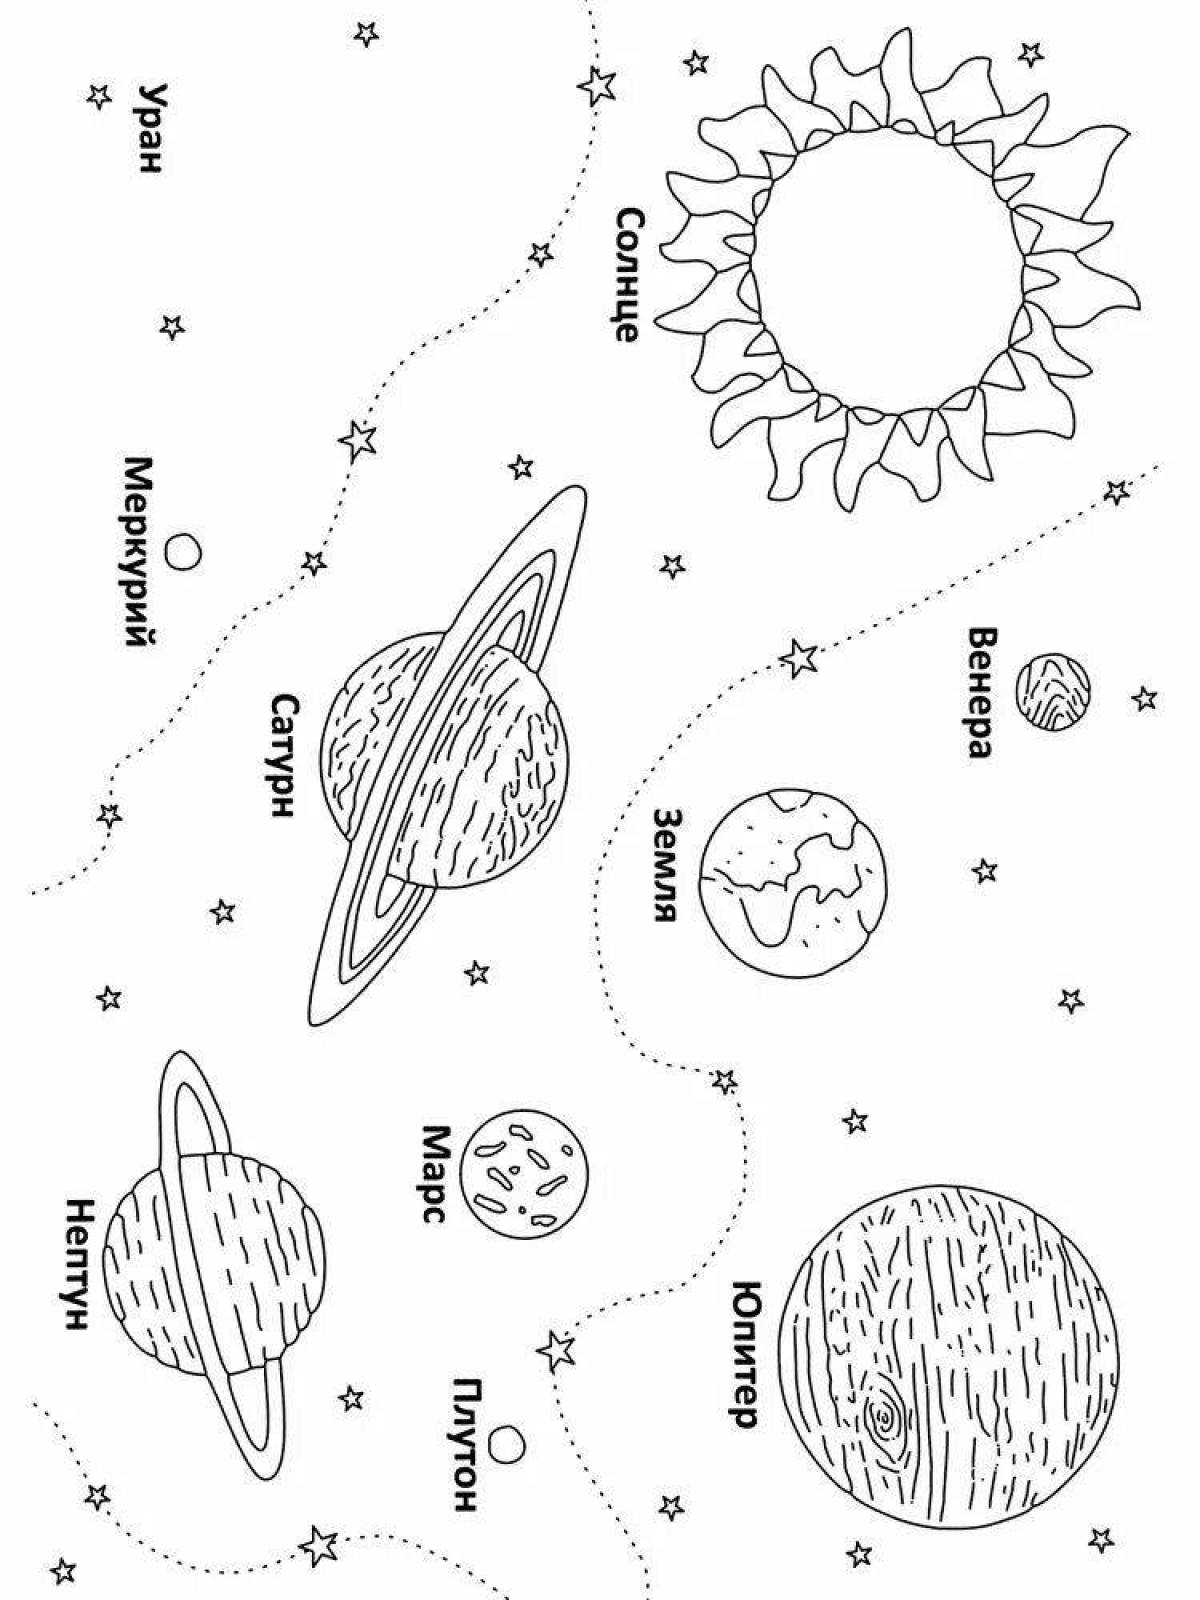 Great coloring of the planets of the solar system in order from the sun with names